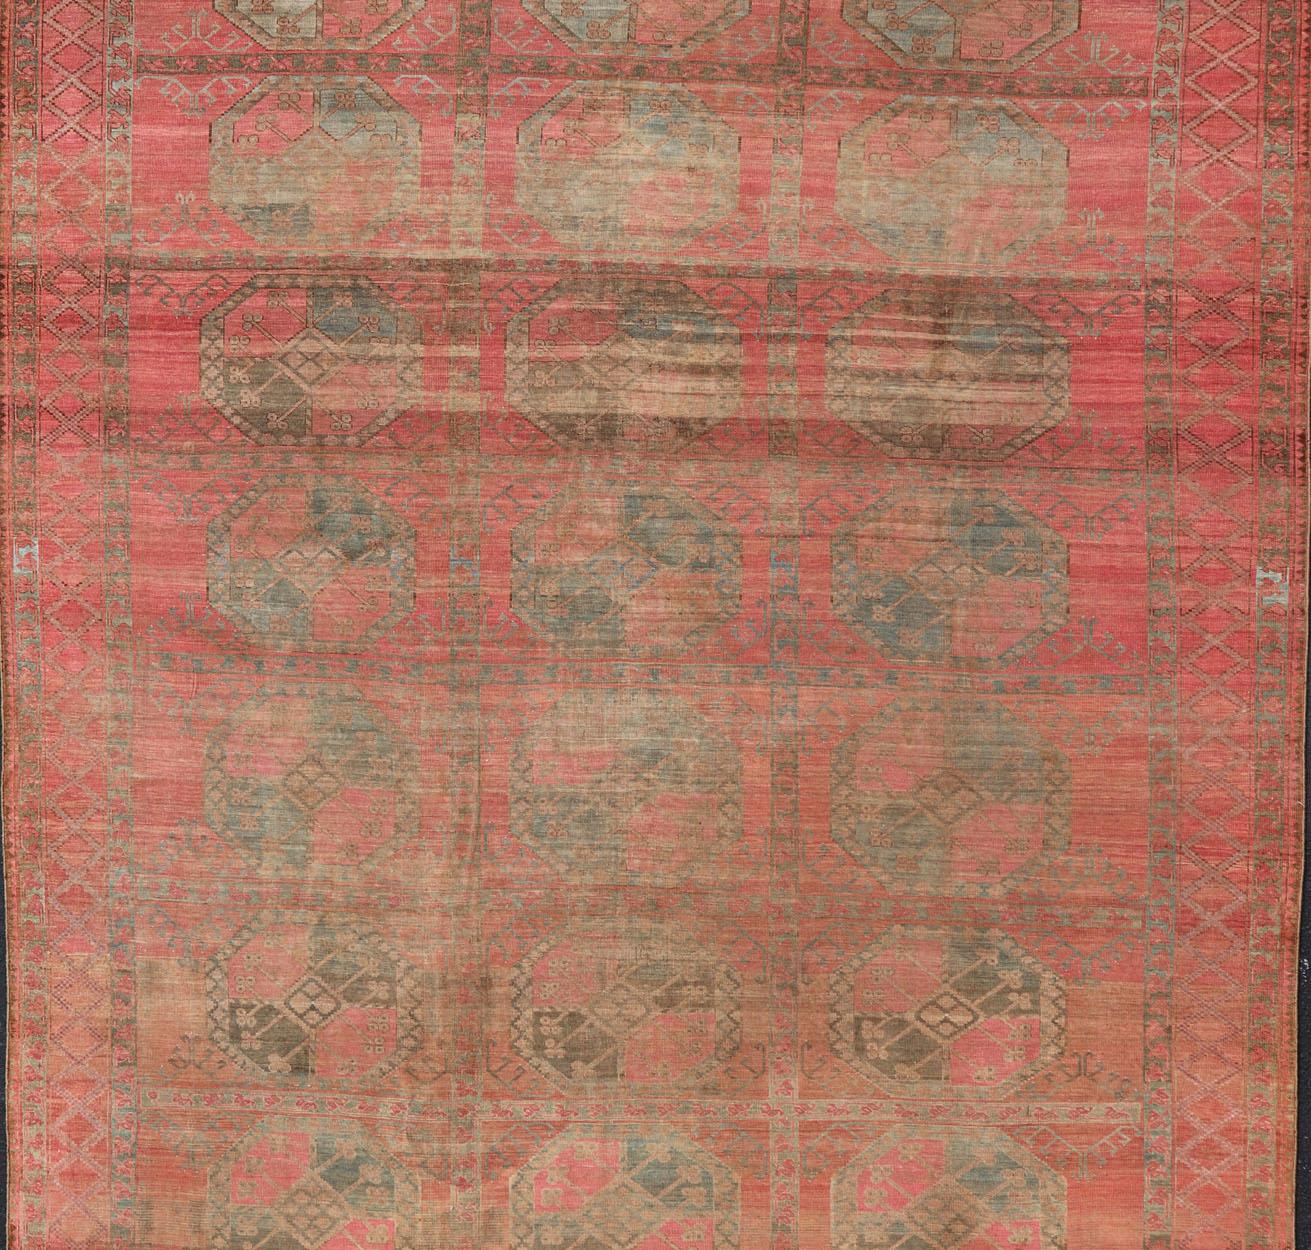 Large Turkomen Ersari Rug with All-Over Gul Design in Tan, Coral, and Brown For Sale 3